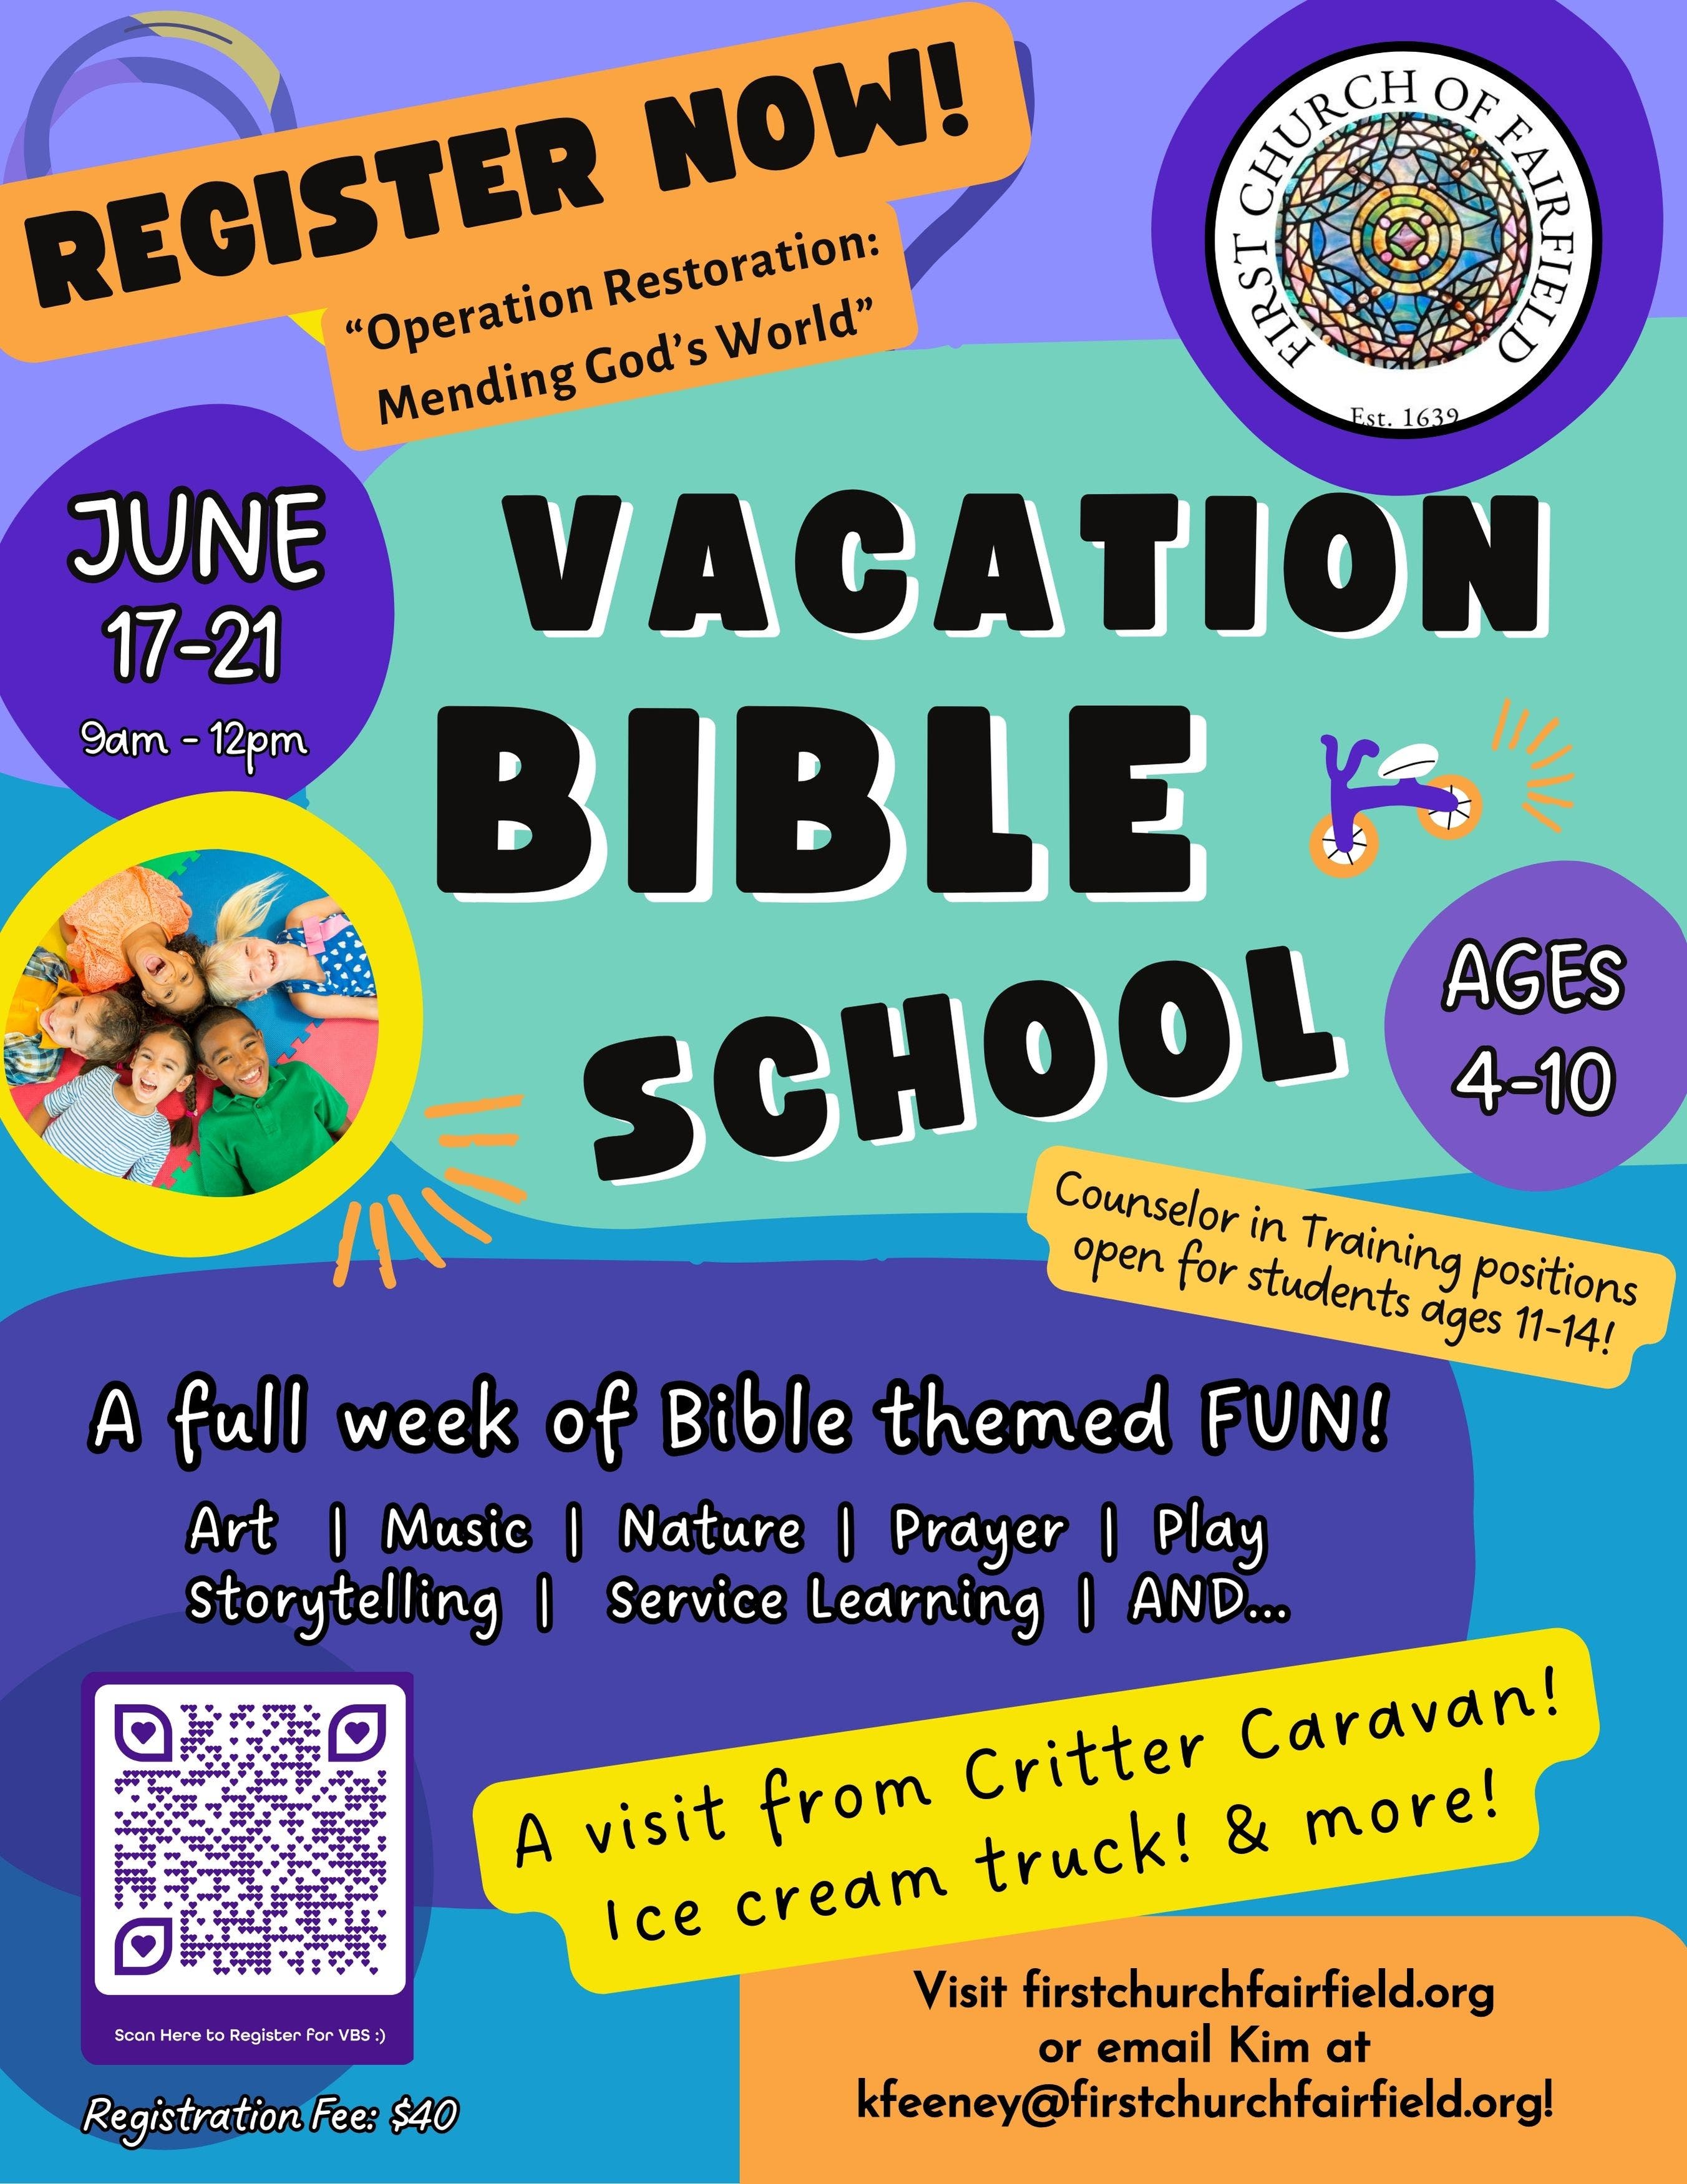 First Church Fairfield Vacation Bible School - SIGN UP TODAY - $40 for the week!